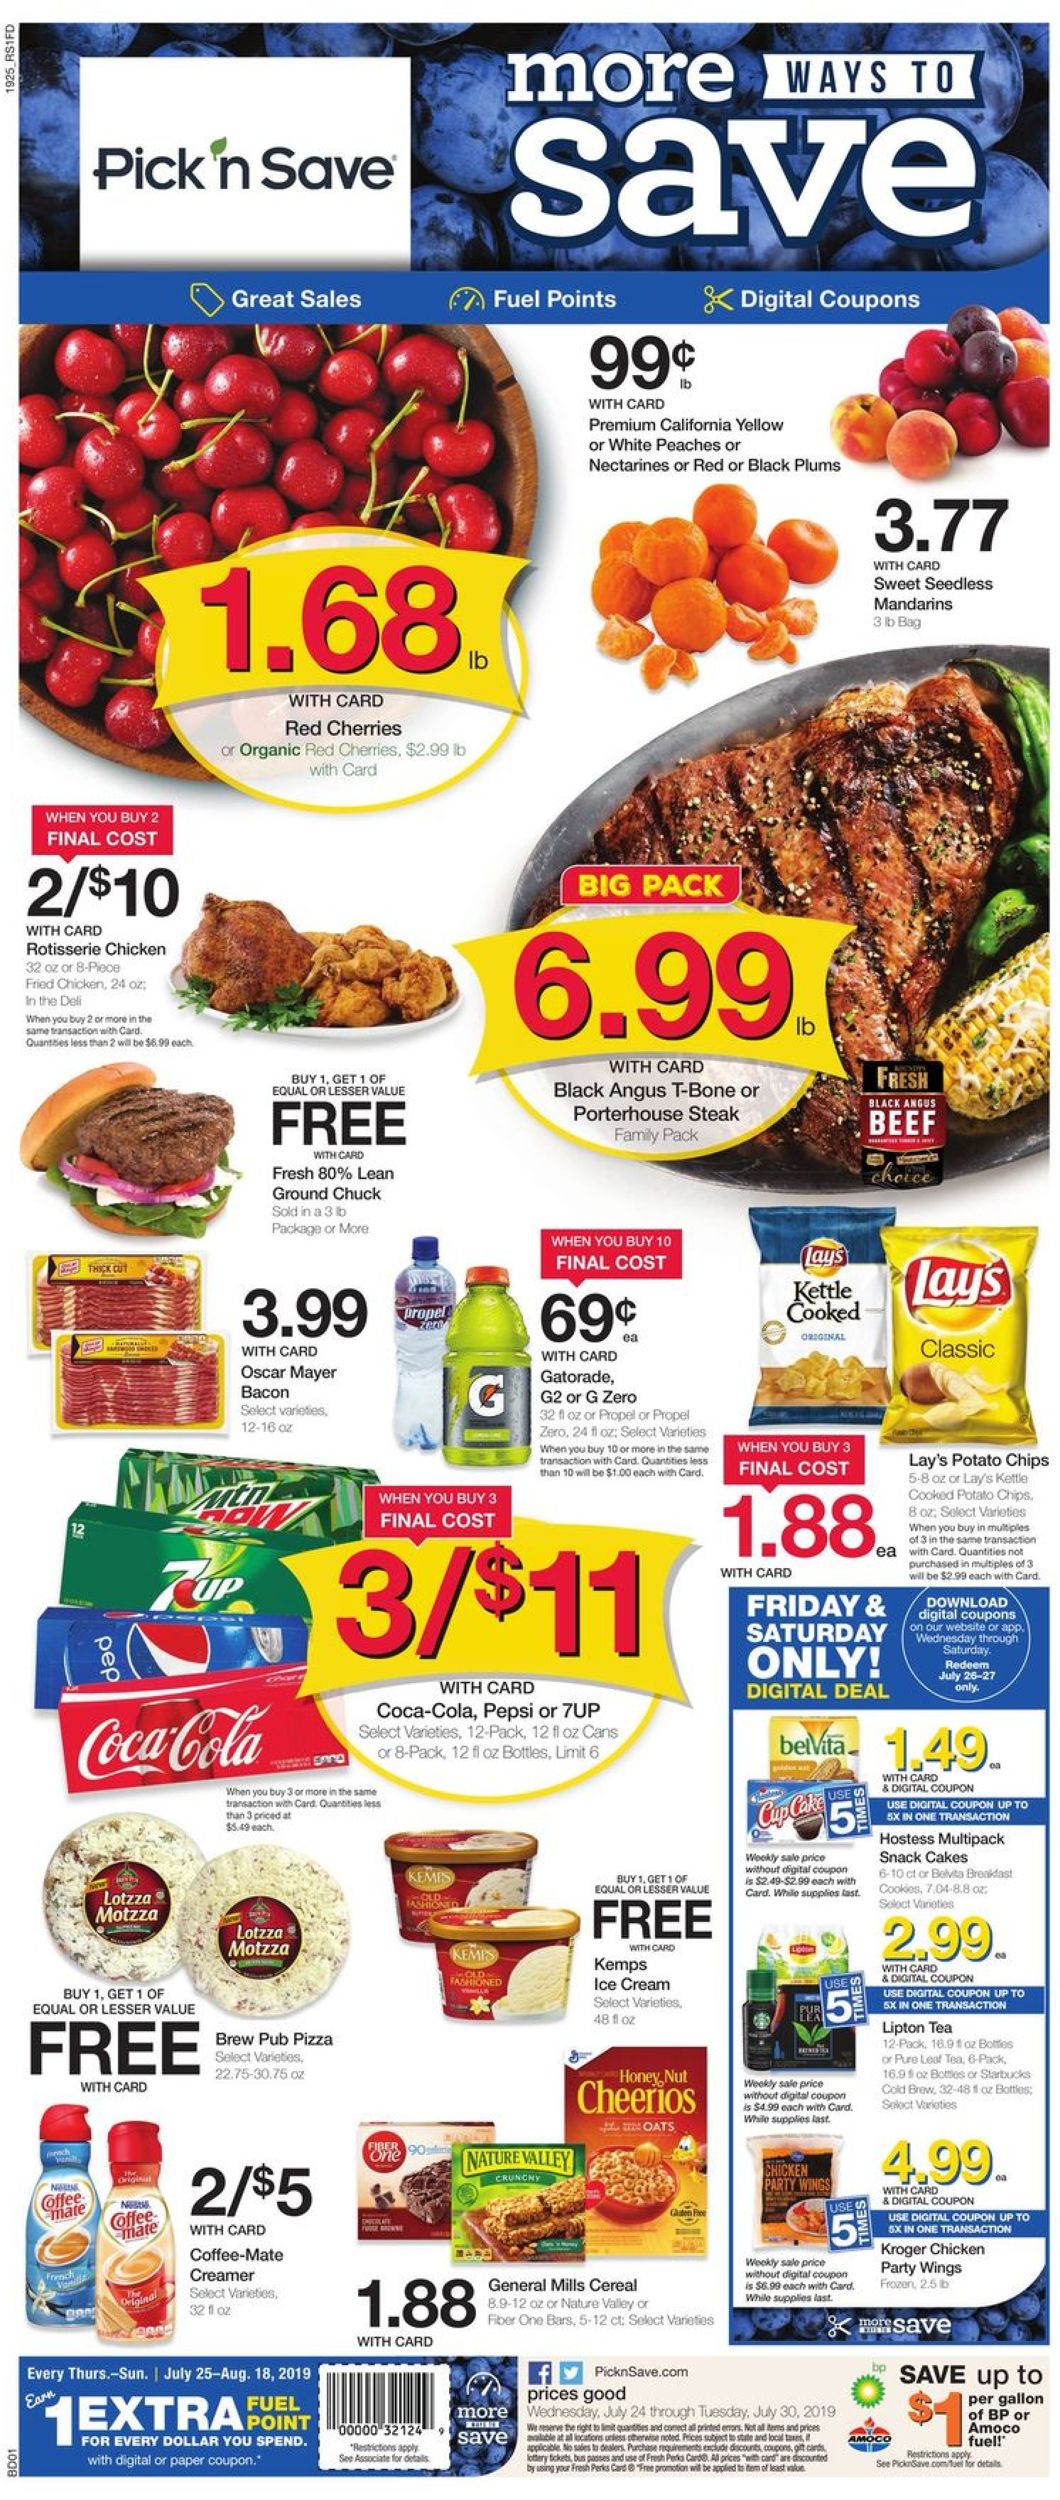 Pick ‘n Save Current weekly ad 07/24 07/30/2019